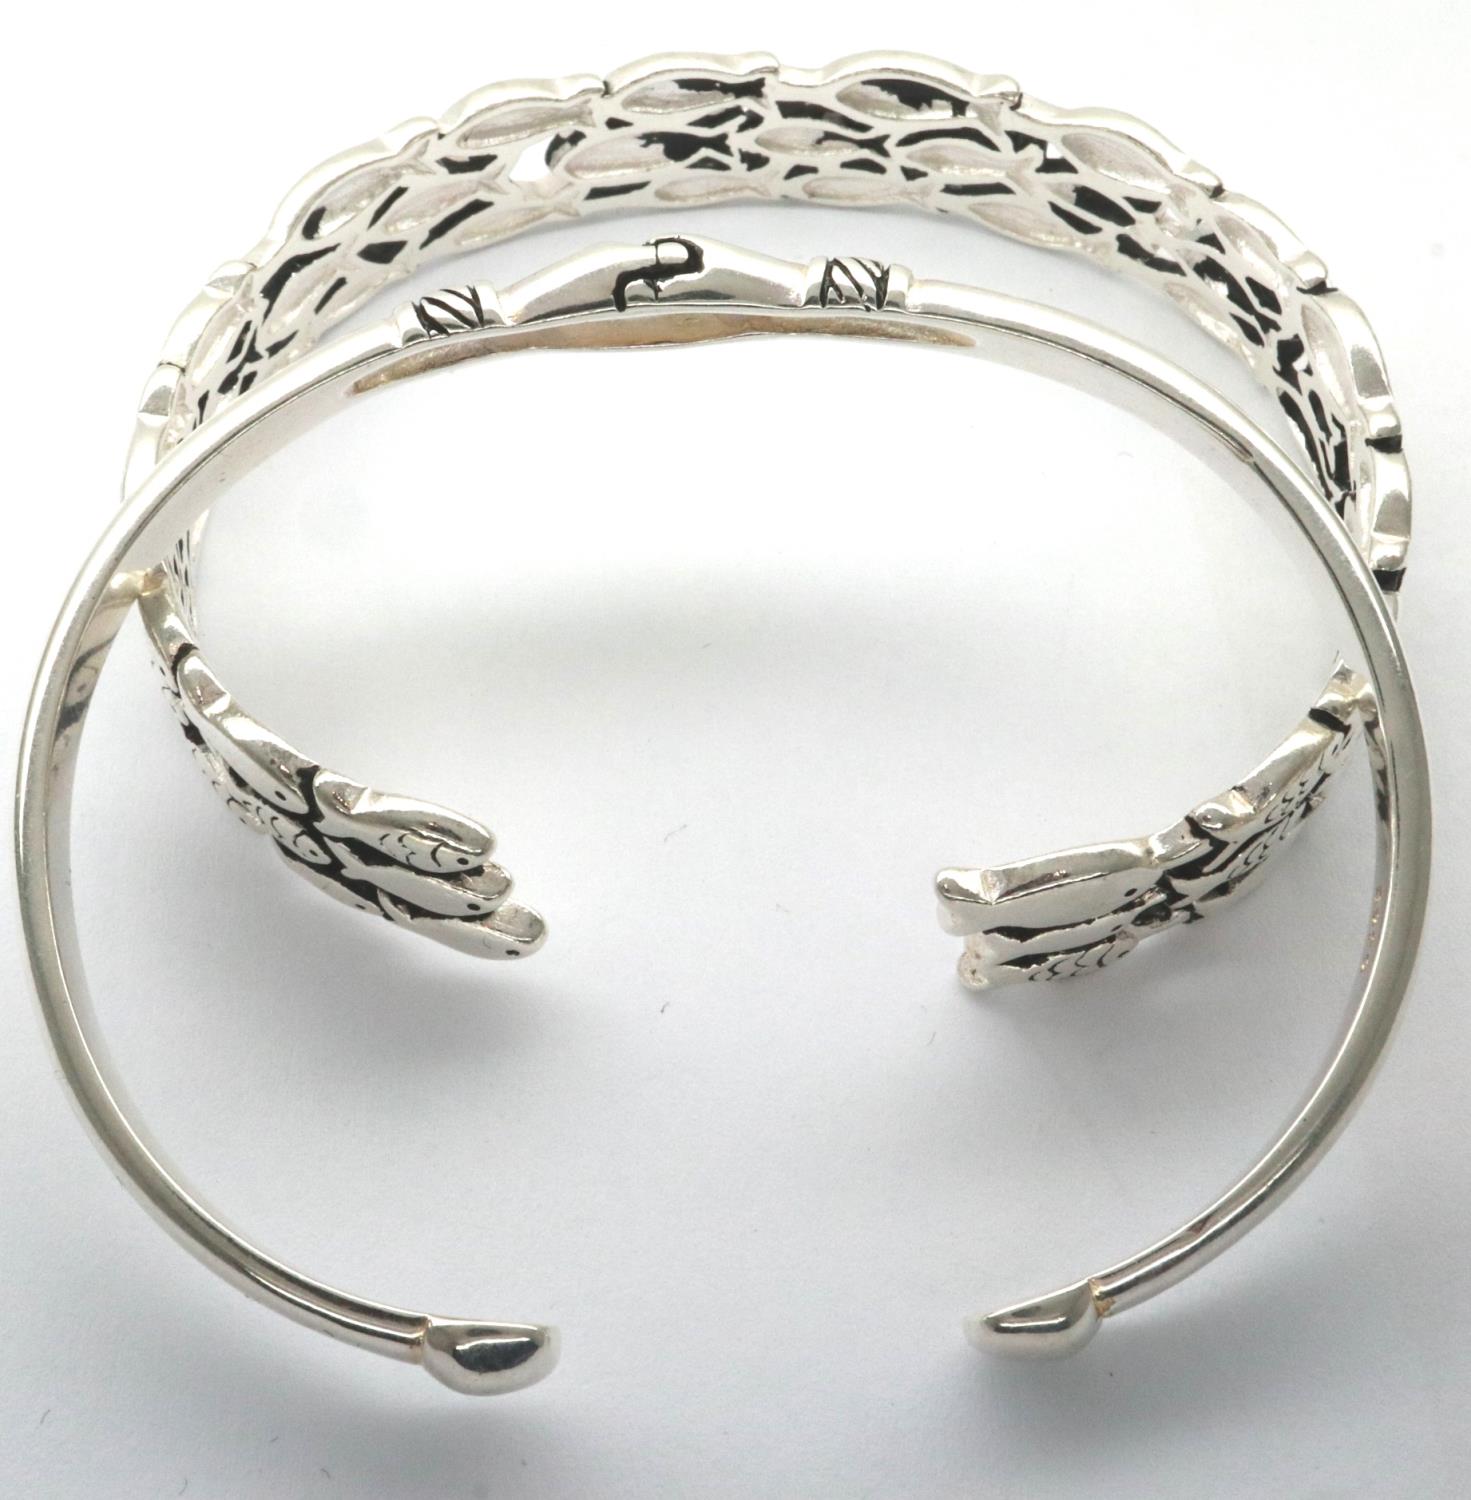 Two 925 silver bangles, largest D: 70 mm. P&P Group 1 (£14+VAT for the first lot and £1+VAT for - Image 2 of 3